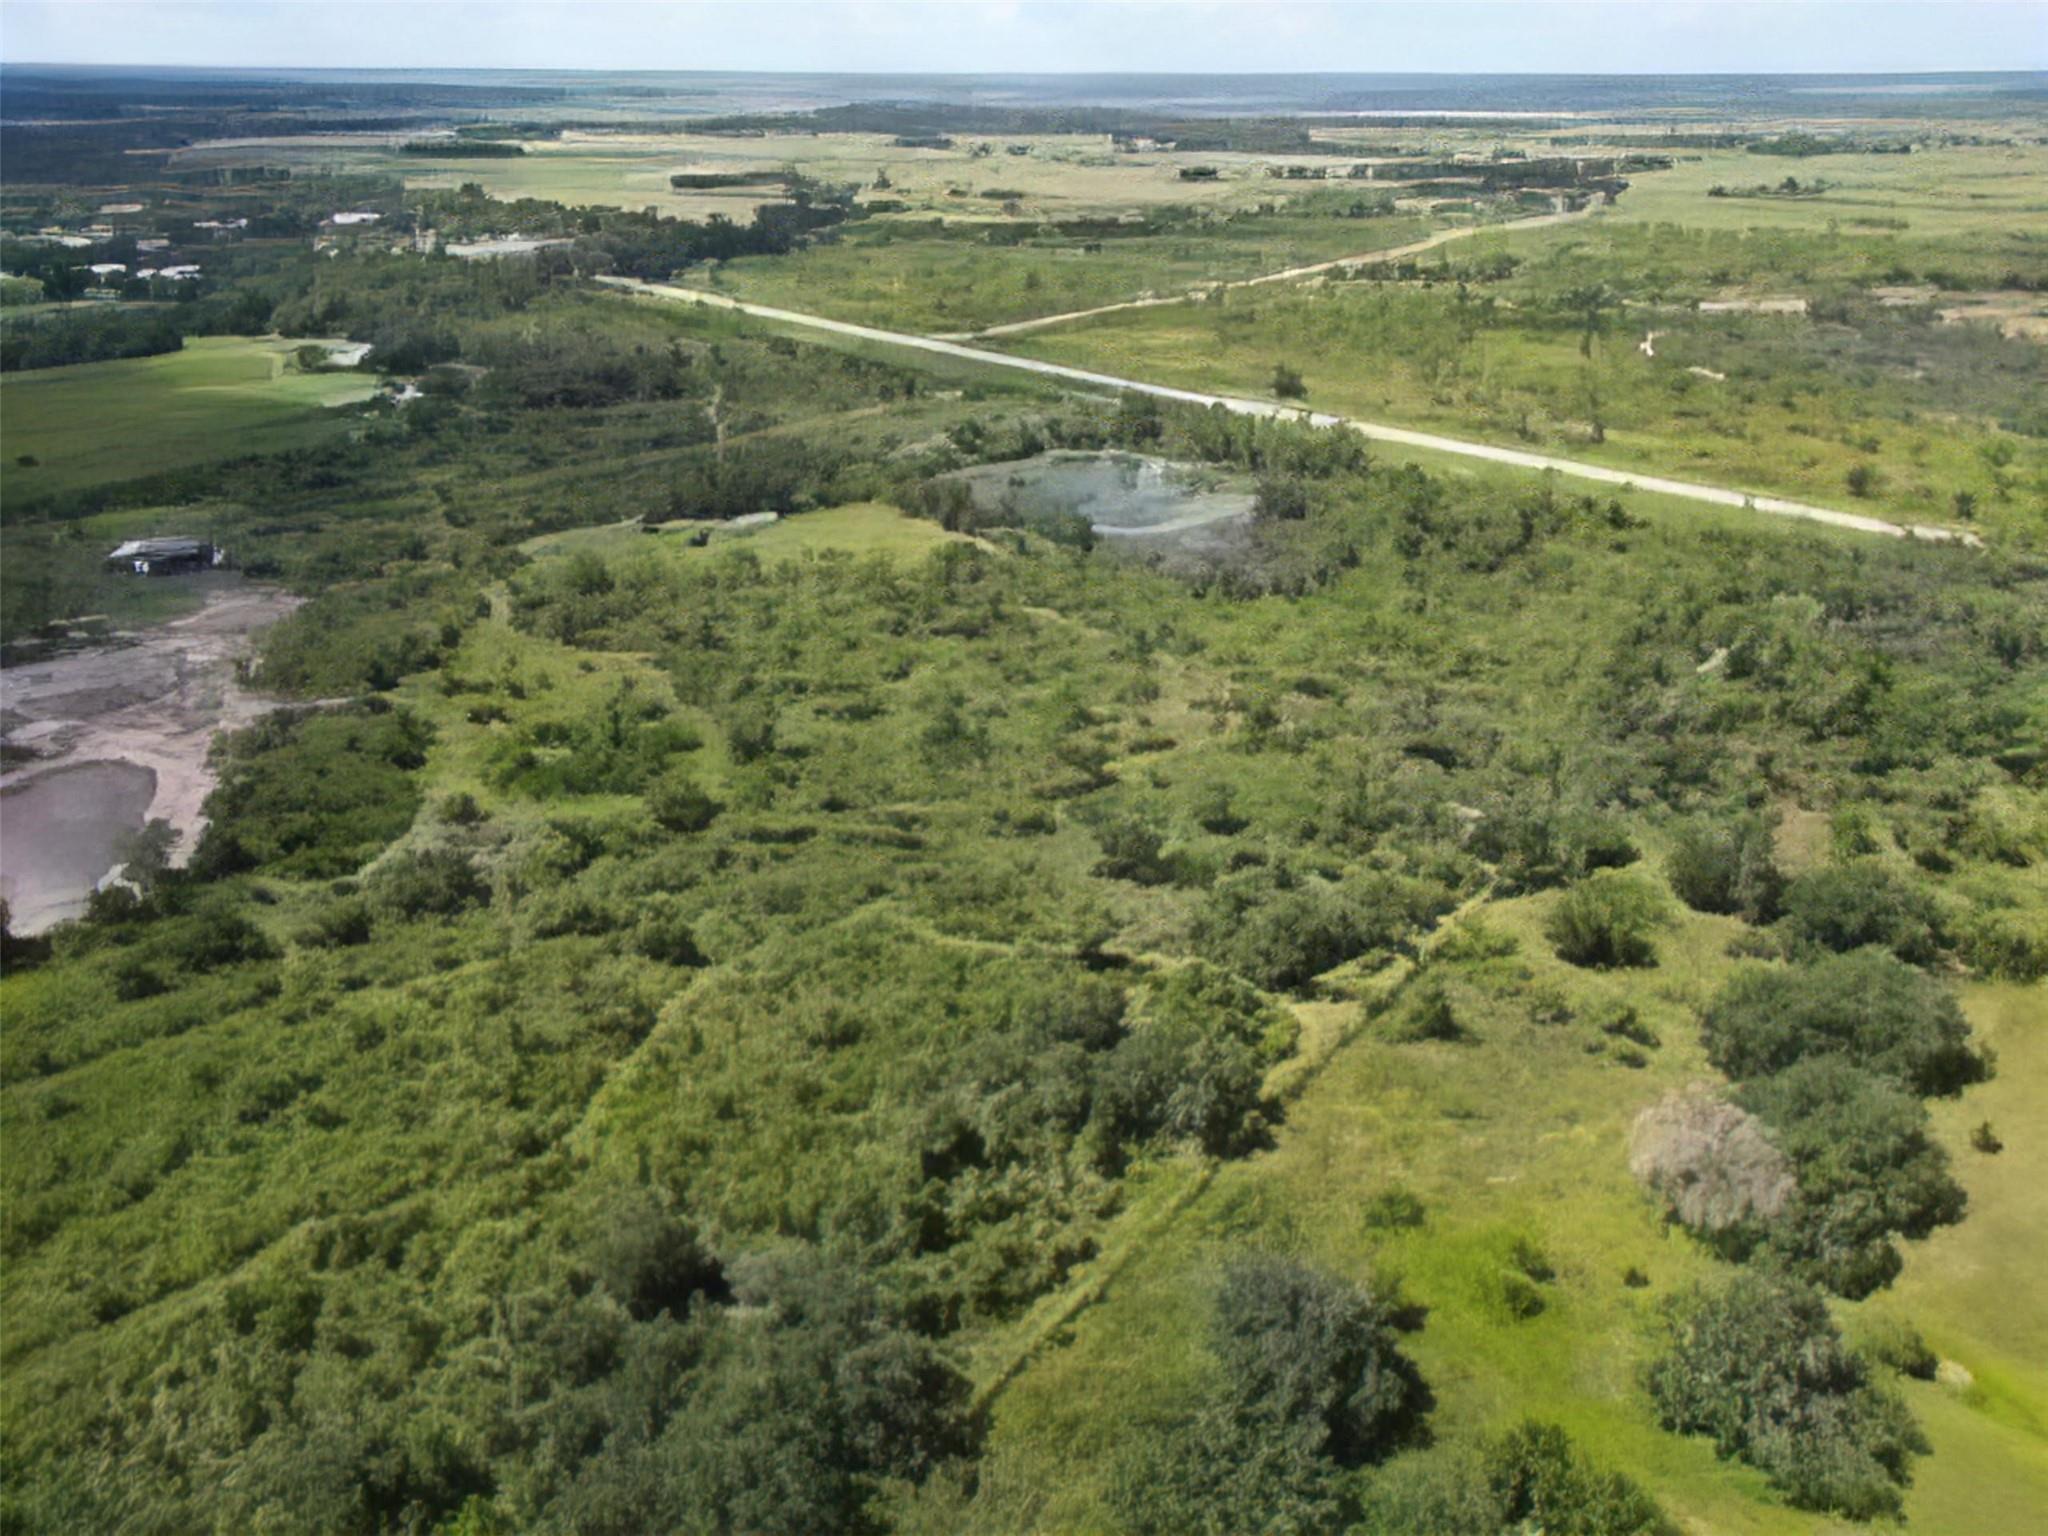 This 21-acre property in Okeechobee County along Highway 98 is a stunning natural haven. It boasts saw palmettos and towering pines, offering a tranquil retreat for nature lovers. A serene flag pond adds to the property's charm, creating a picturesque landscape perfect for various outdoor pursuits or development opportunities. Embrace Florida's natural beauty in this captivating setting.